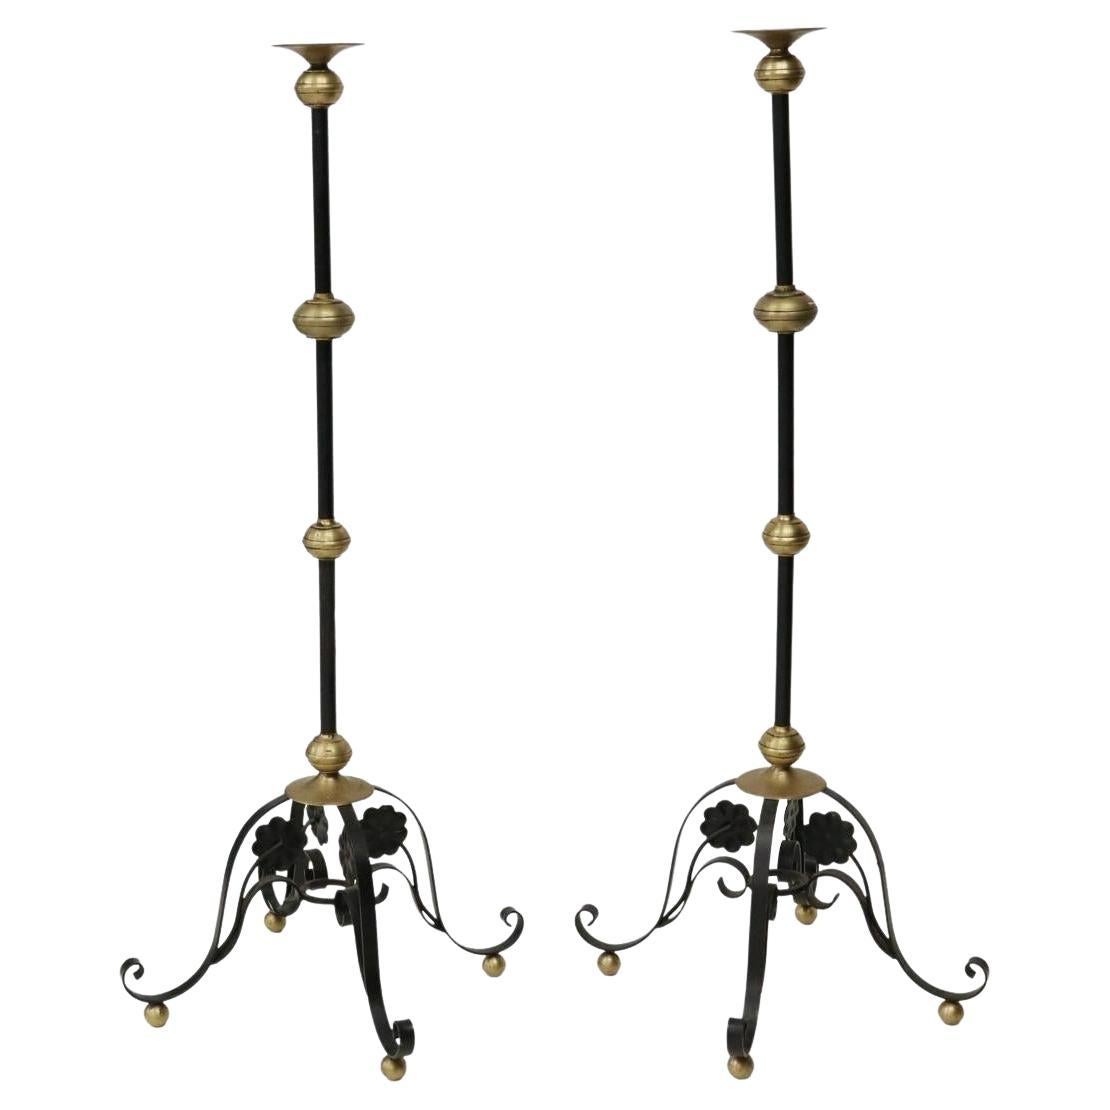 Tall Brass and Wrought Iron Church Torchères Candle Floor Stands, a Pair For Sale